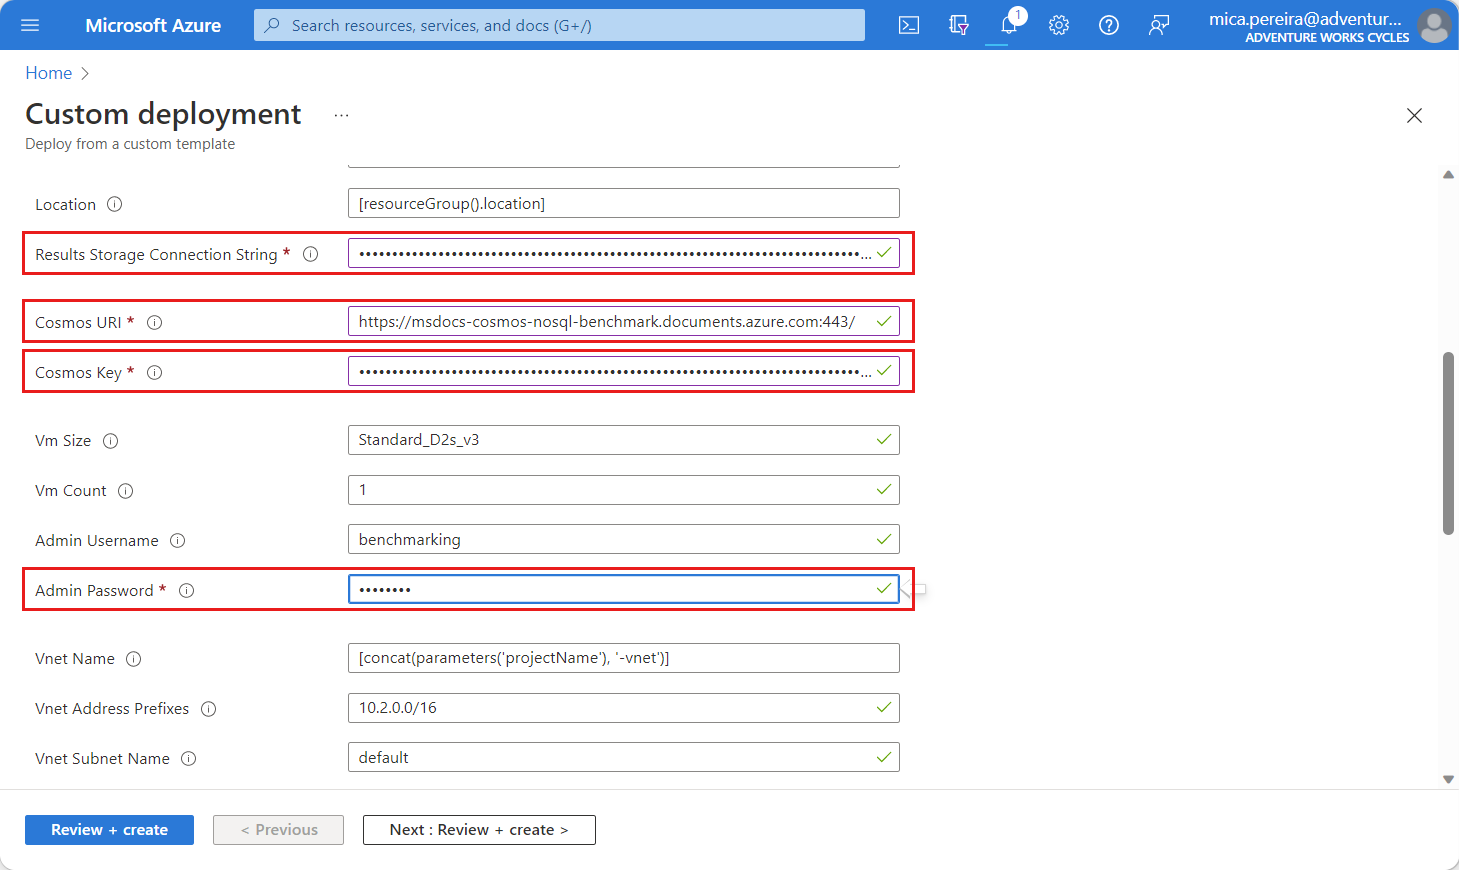 Screenshot of the Custom Deployment page with parameters values filled out.